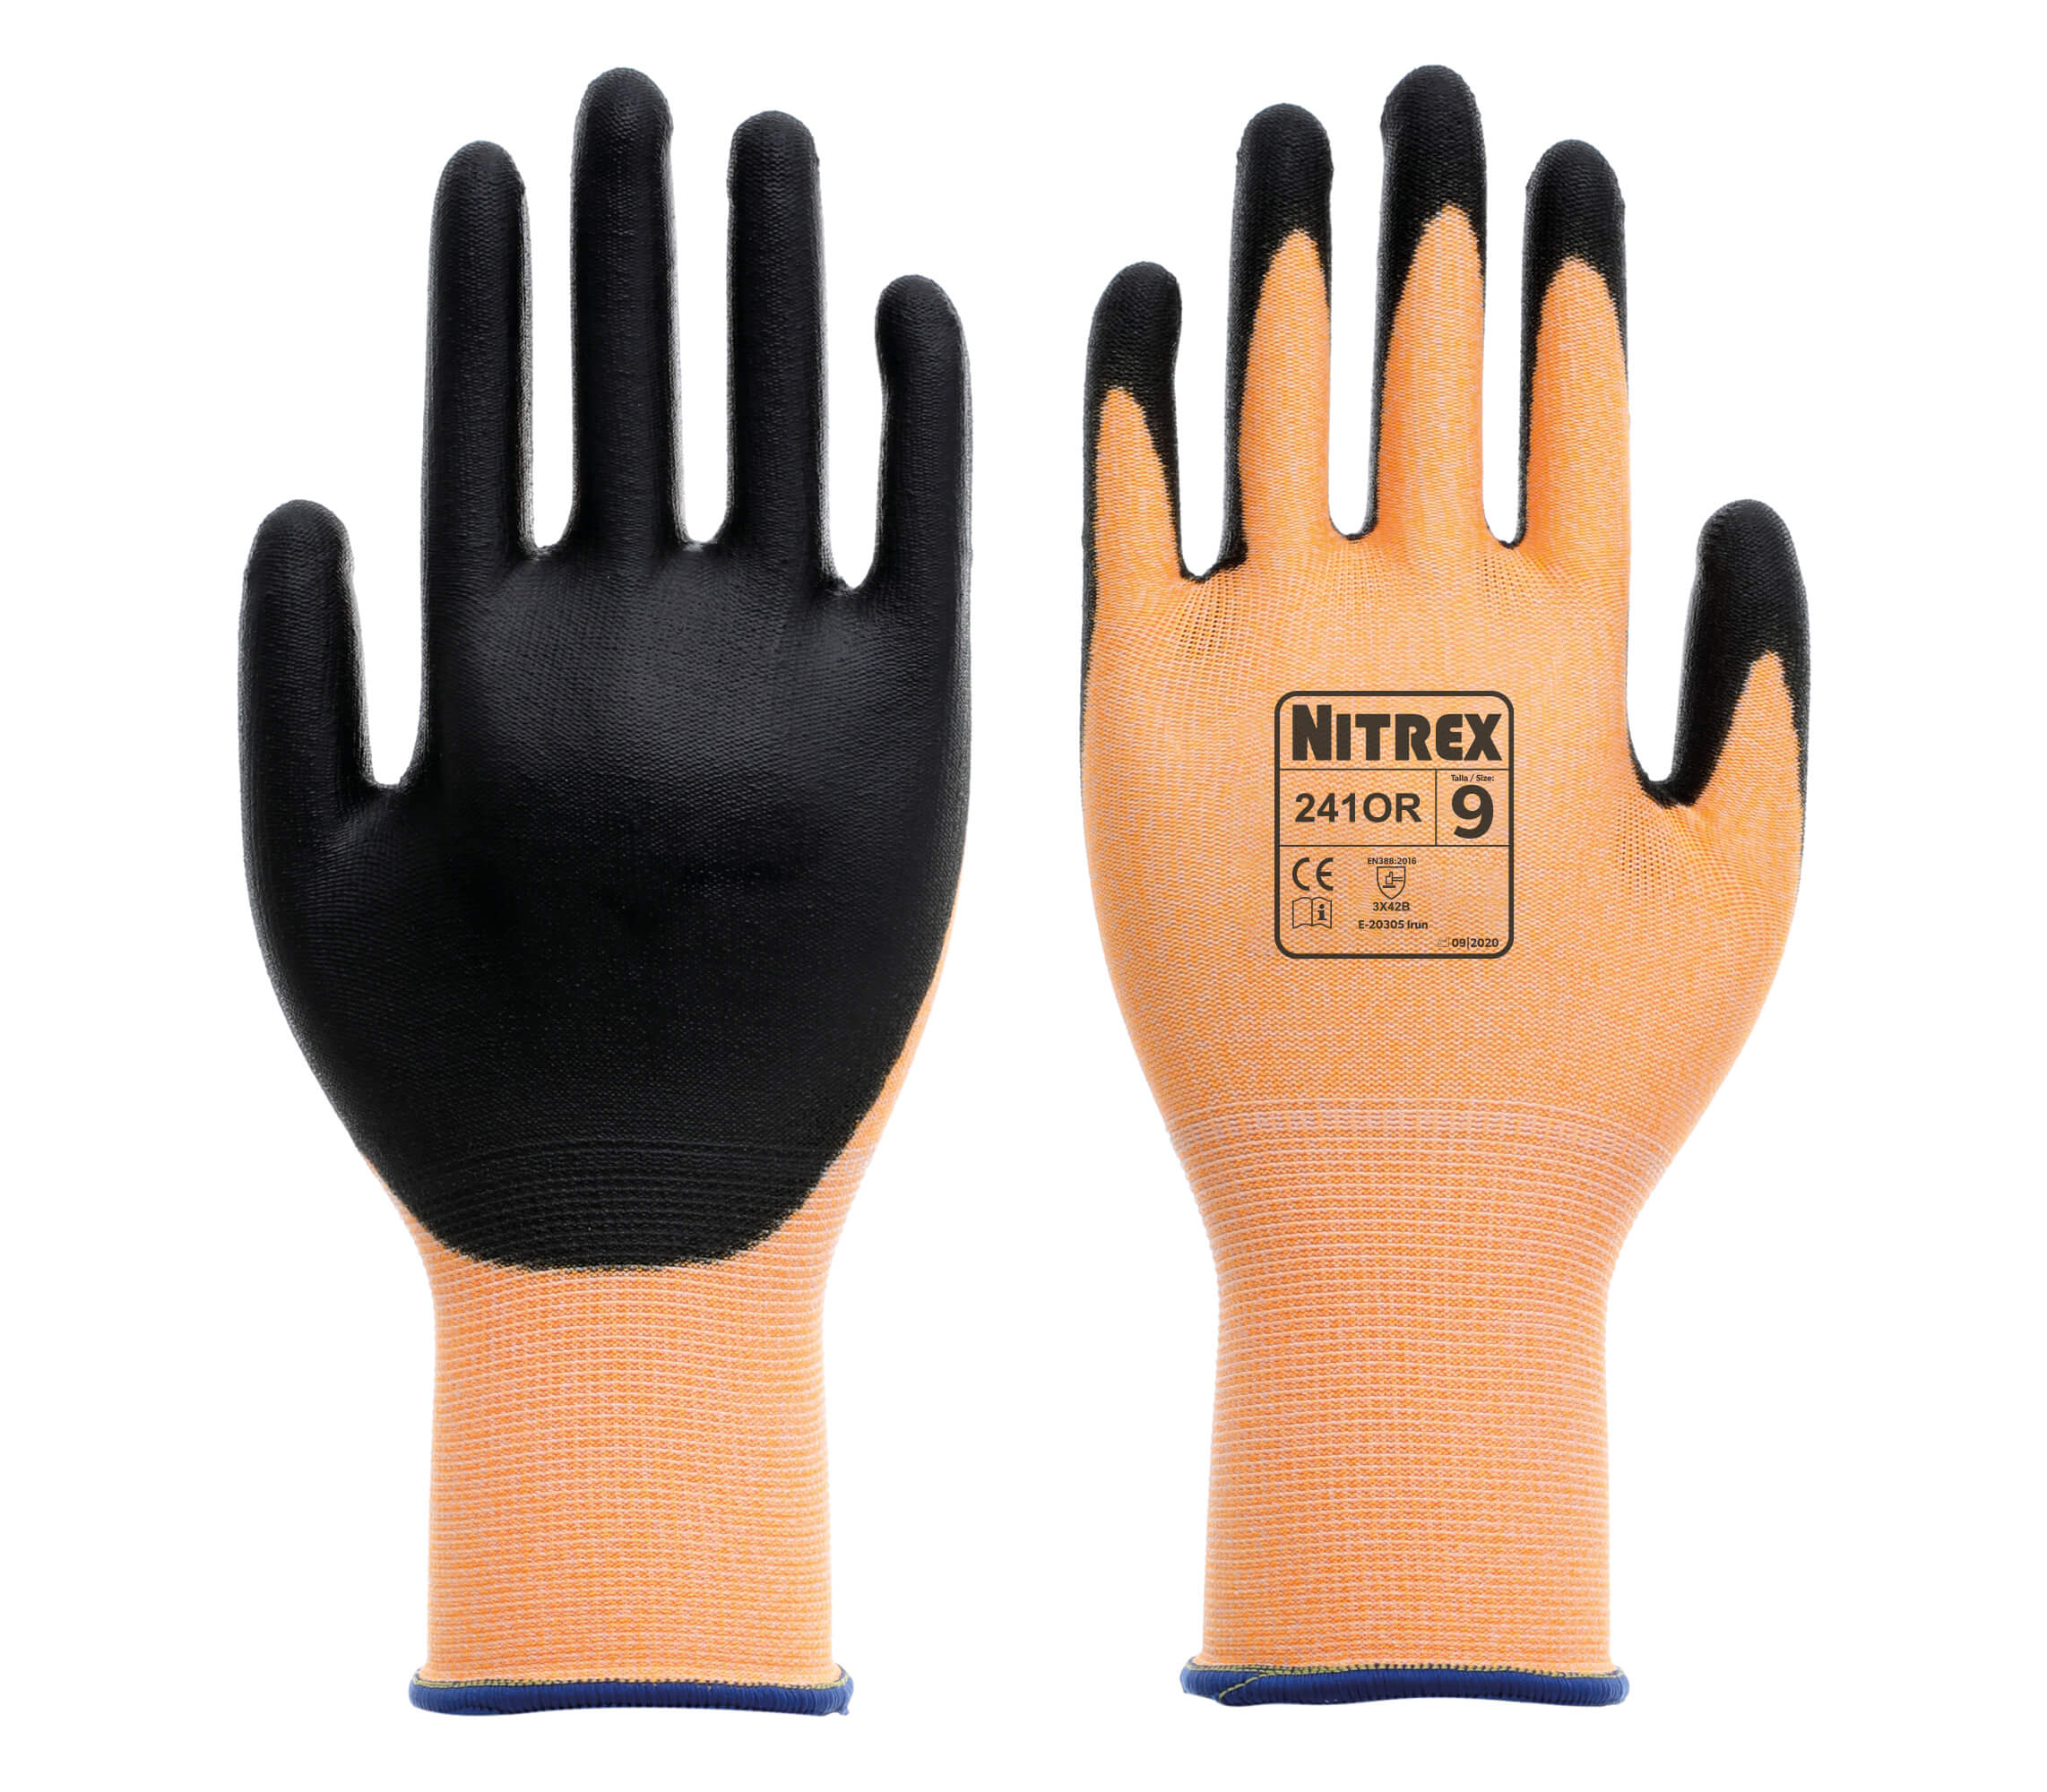 Nitrex 241OR - PU Palm Coated Safety Gloves - Cut Level B - Size 7/Small